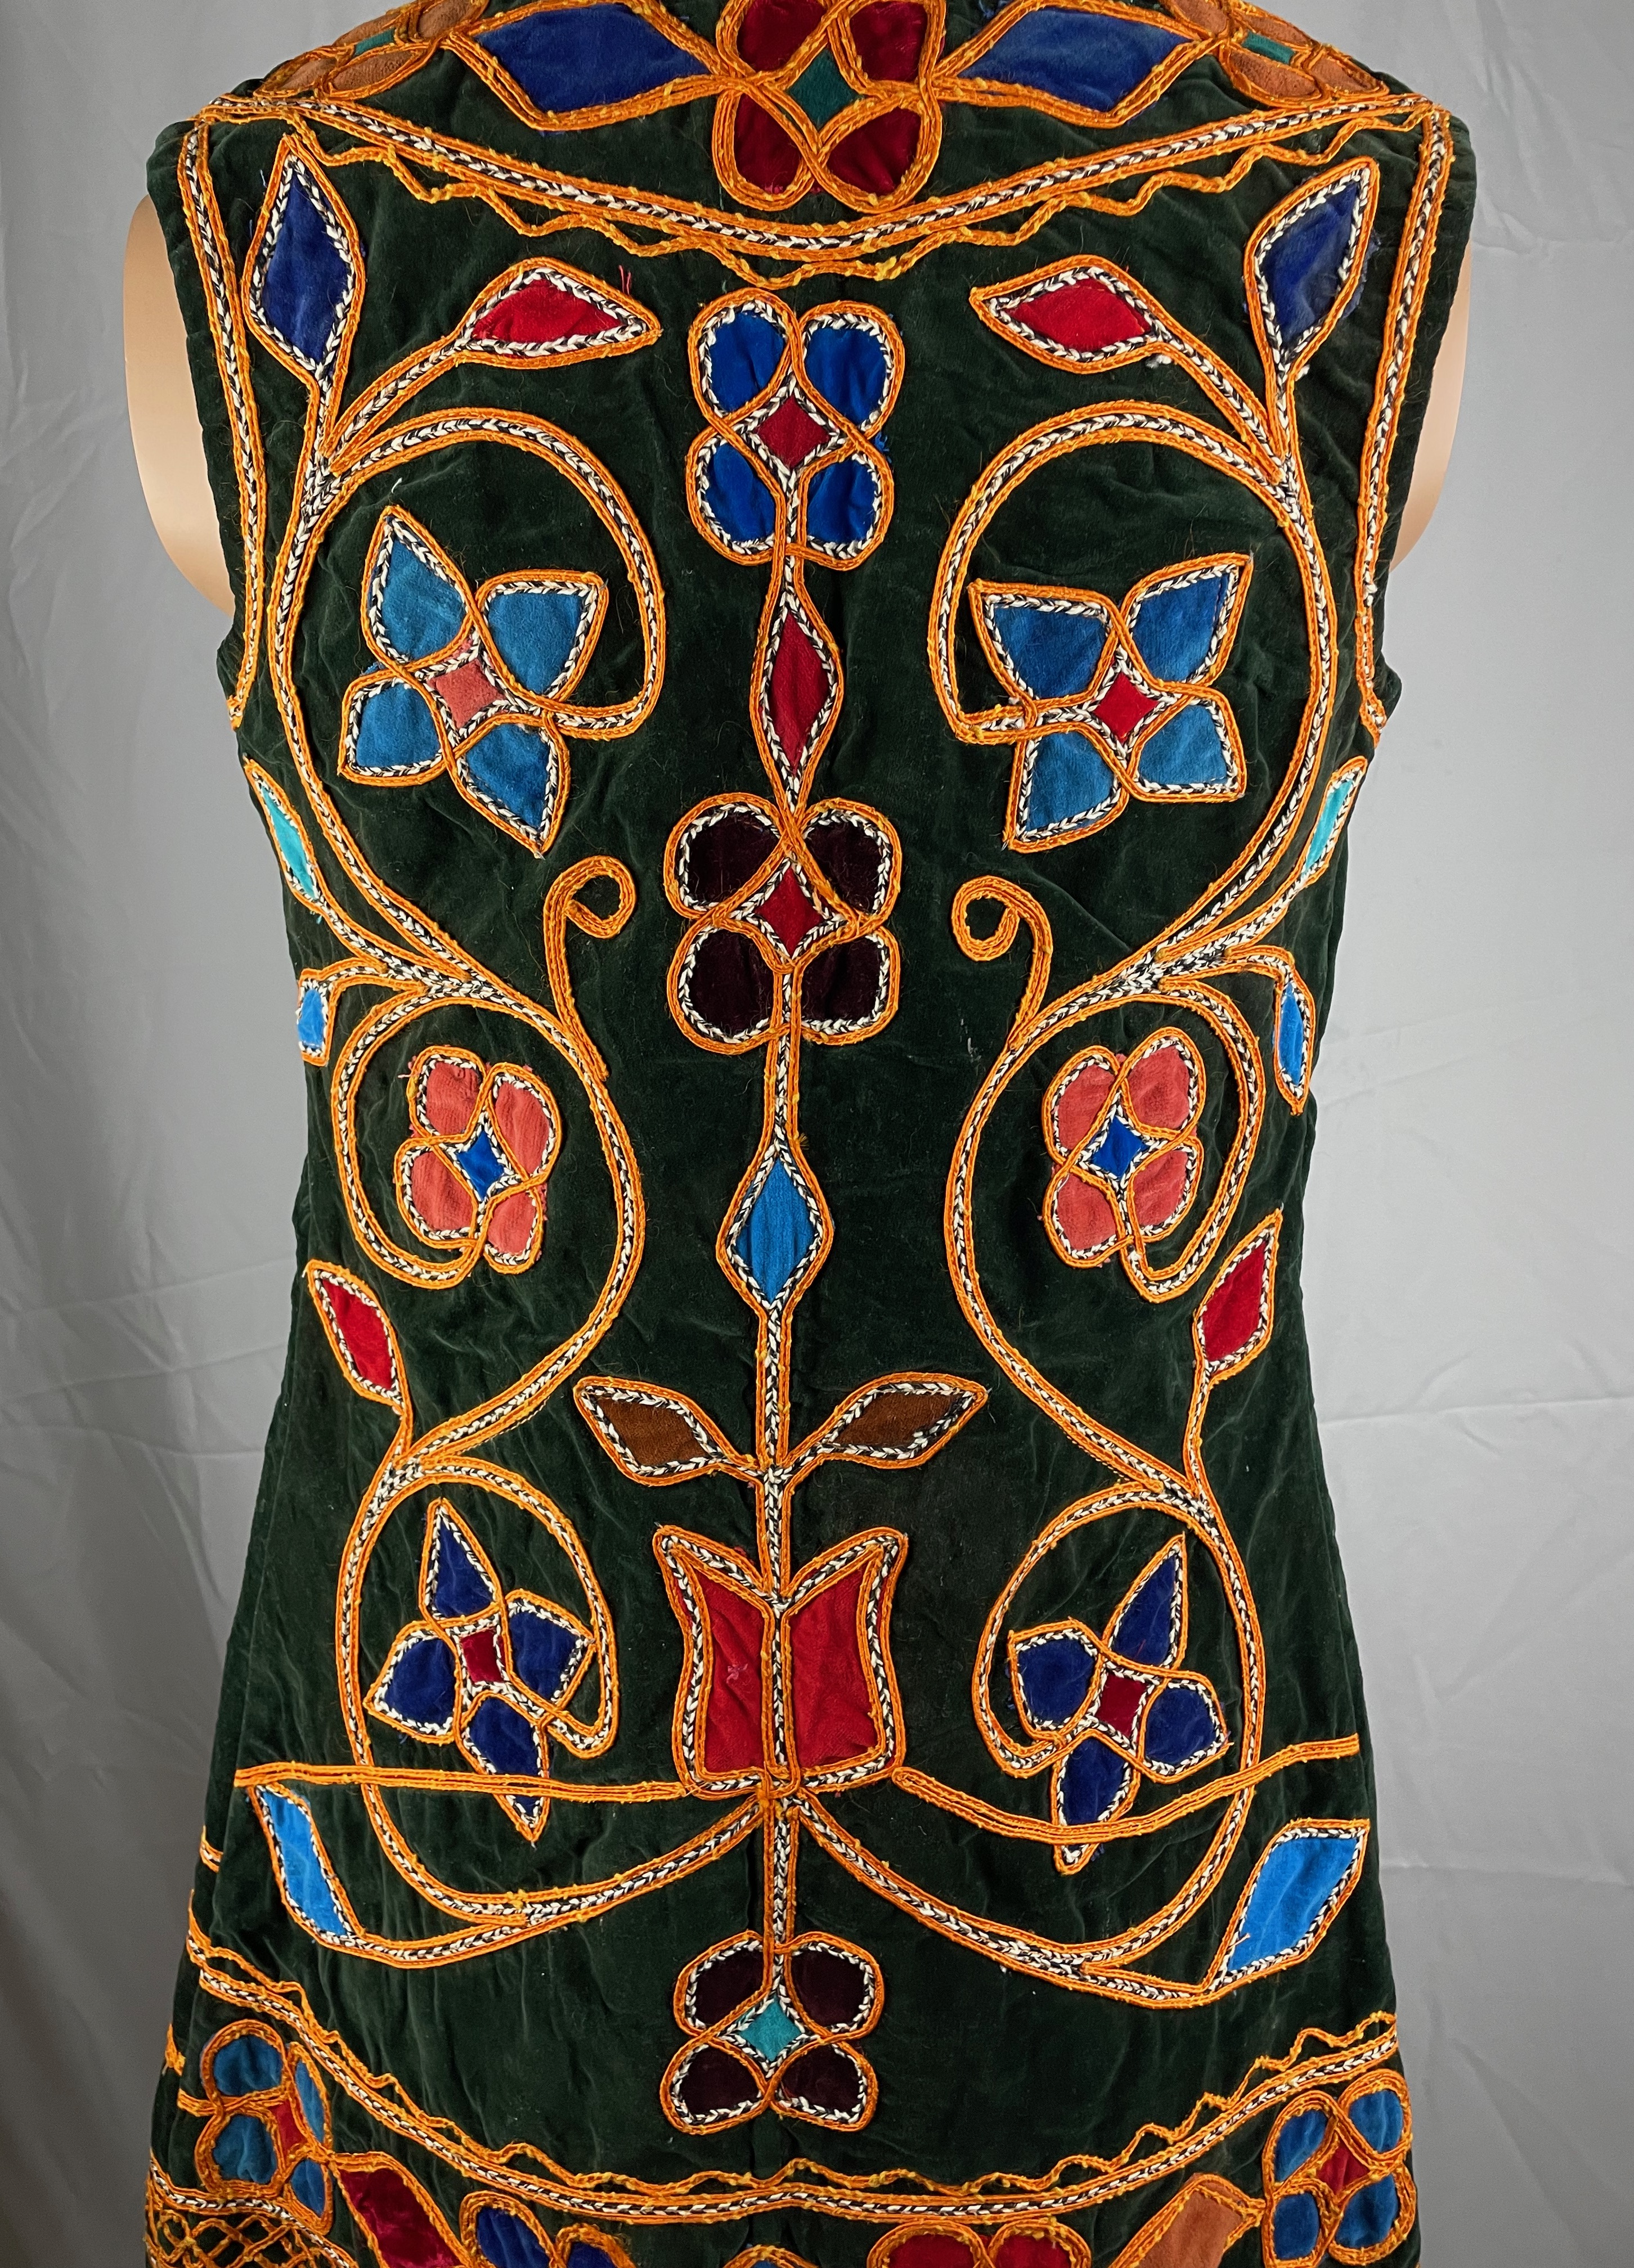 Black vest with gold vine details and blue and red flowers